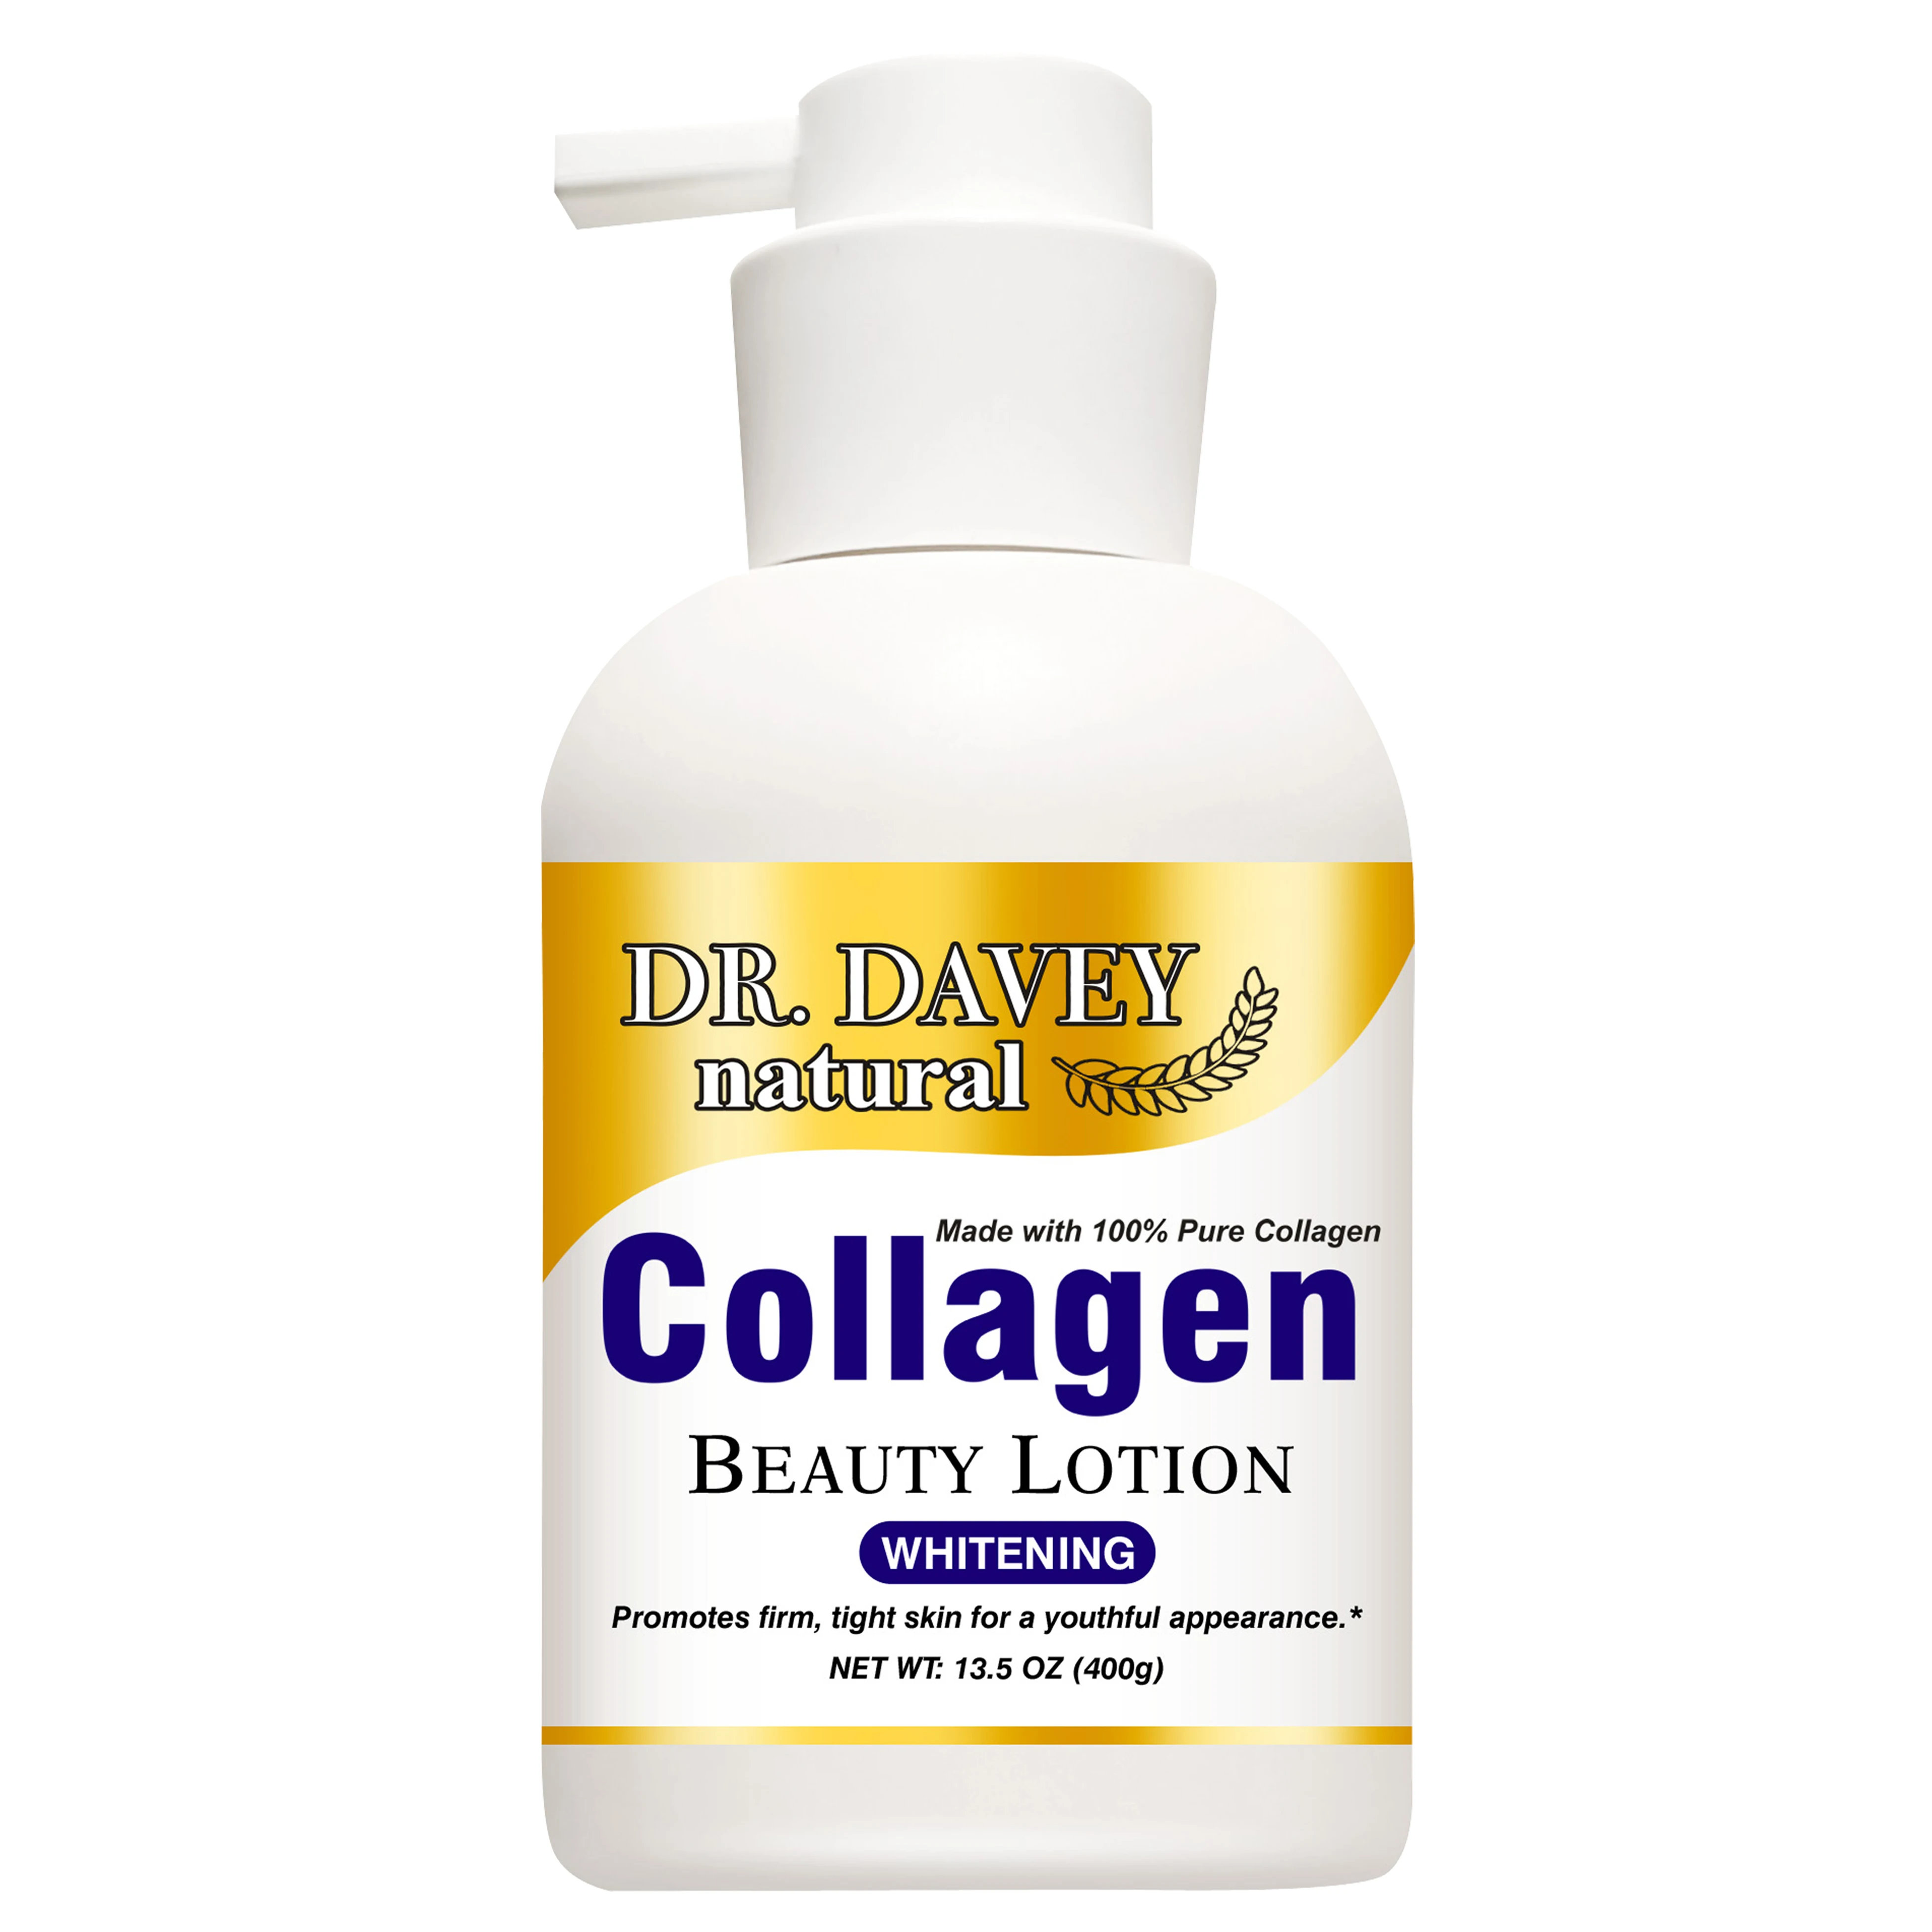 

DR. DAVEY Natural beauty whitening natural collagen pearl body lotion, Milk white